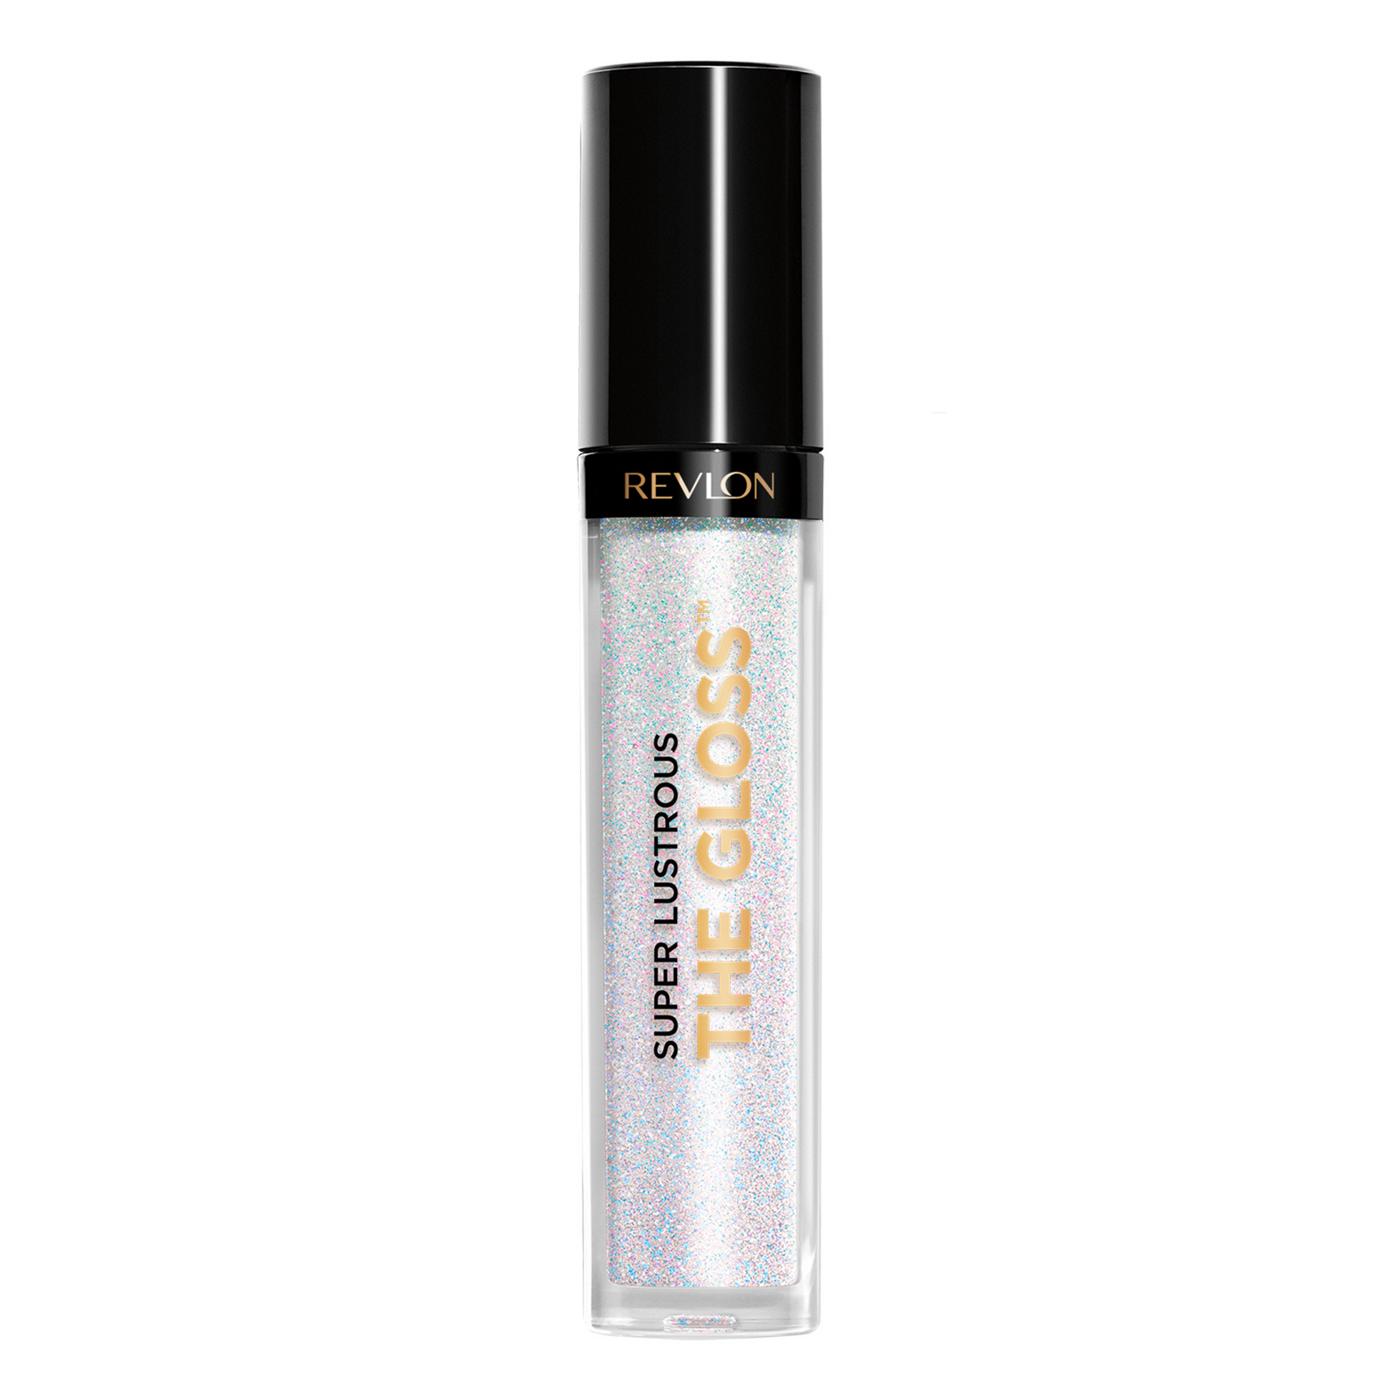 Revlon Super Lustrous The Gloss, 304 Frost Queen; image 1 of 7